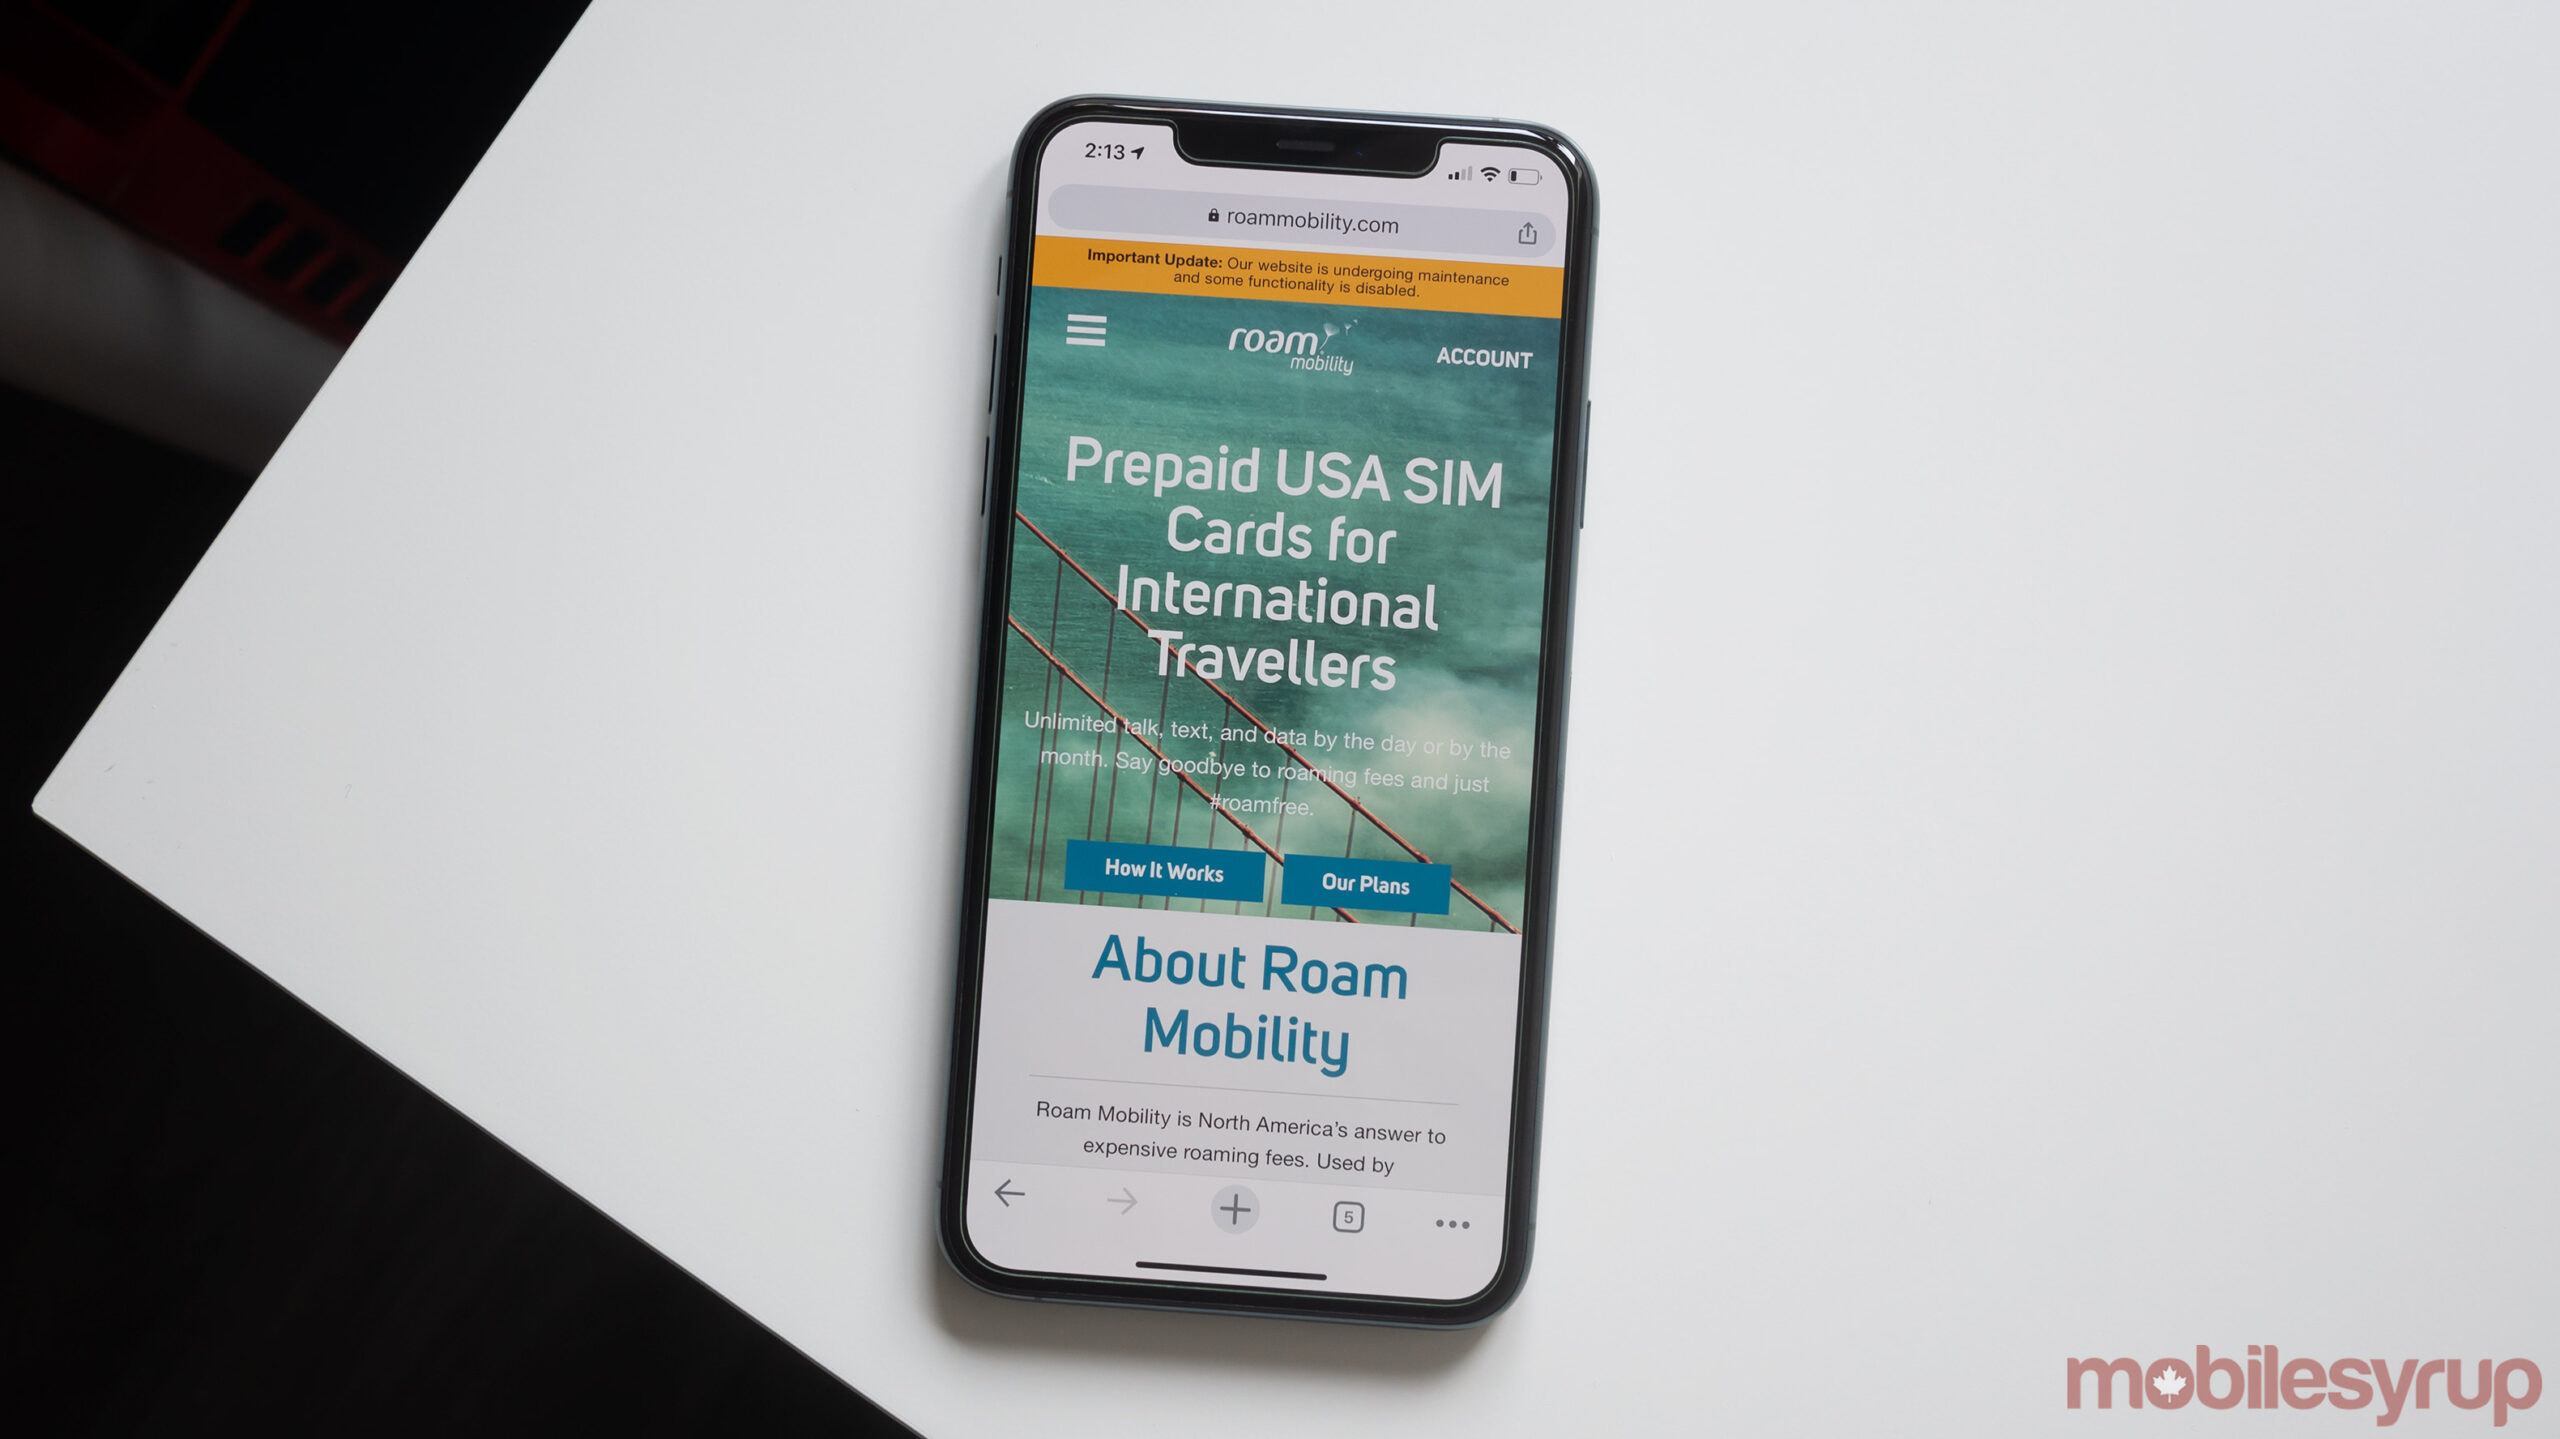 Roam Mobility ceasing operations permanently on June 30, 2020